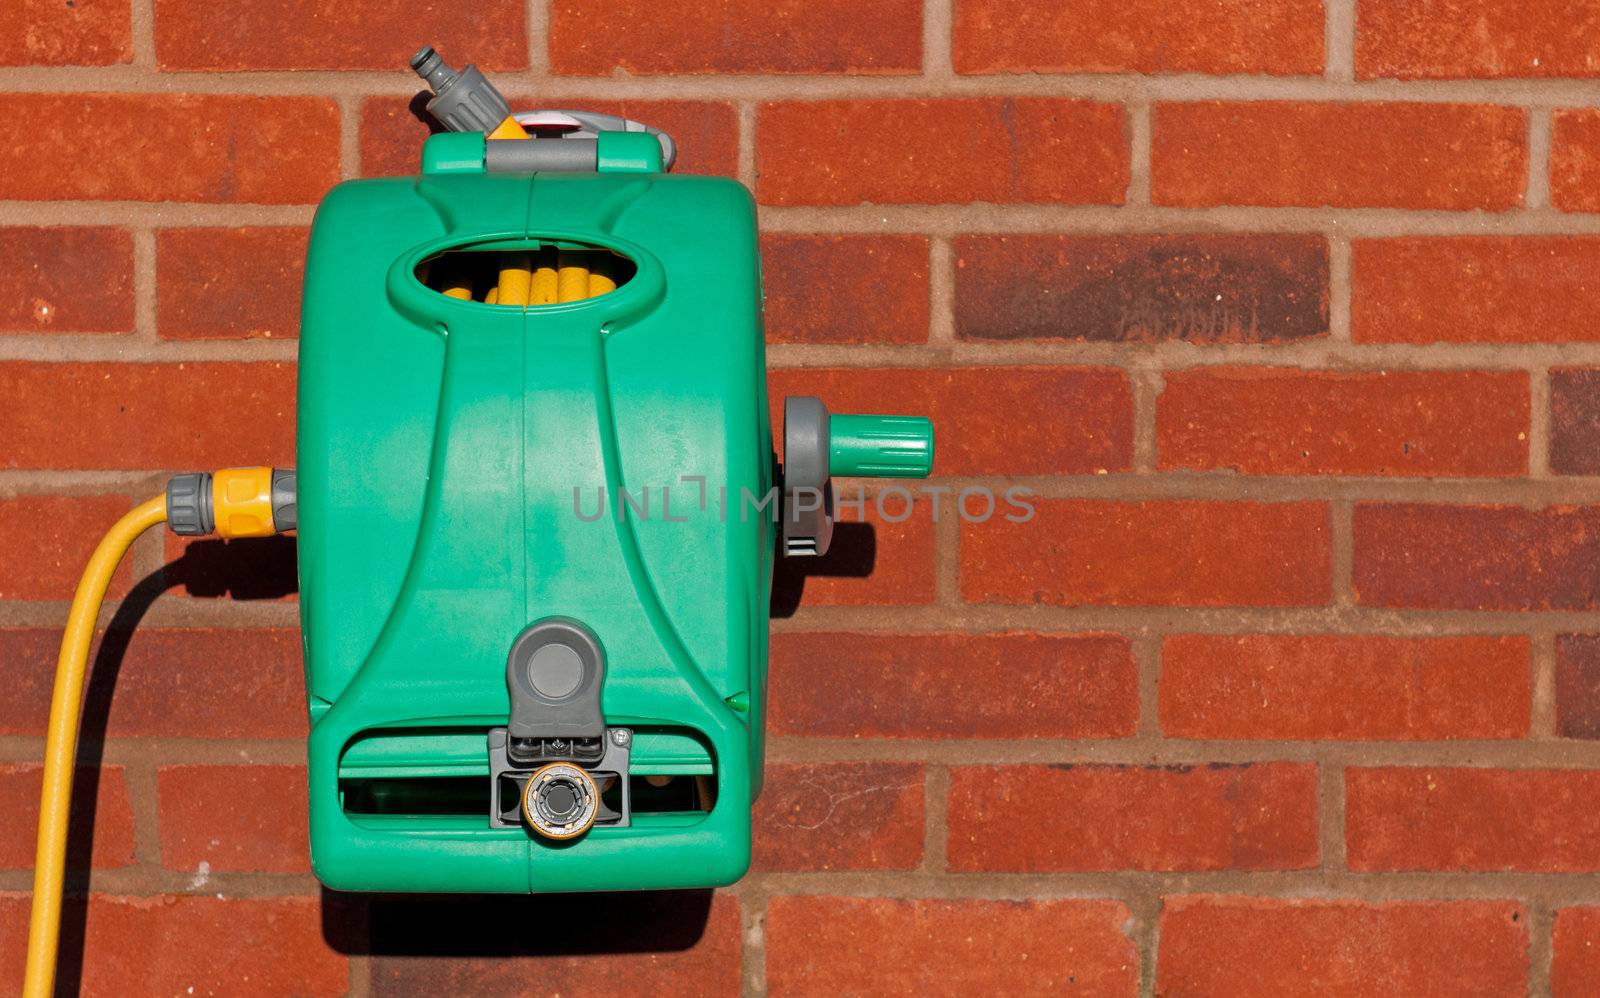 garden hose reel kit installed on a brick wall (copy-space available)